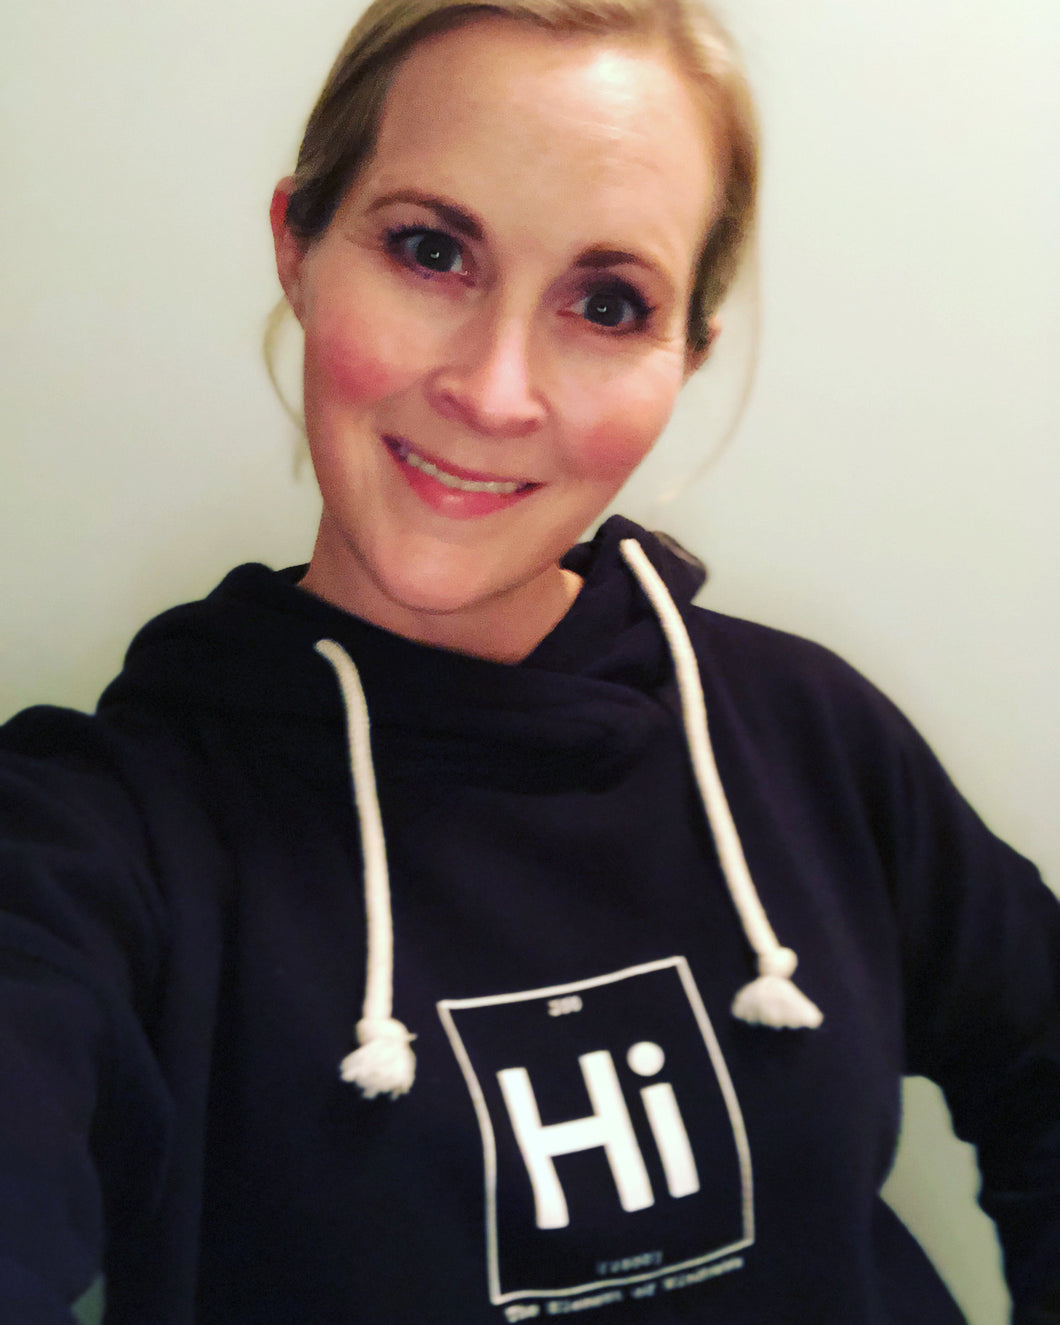 Hi - Element of Kindness Women’s Cropped Hoodie